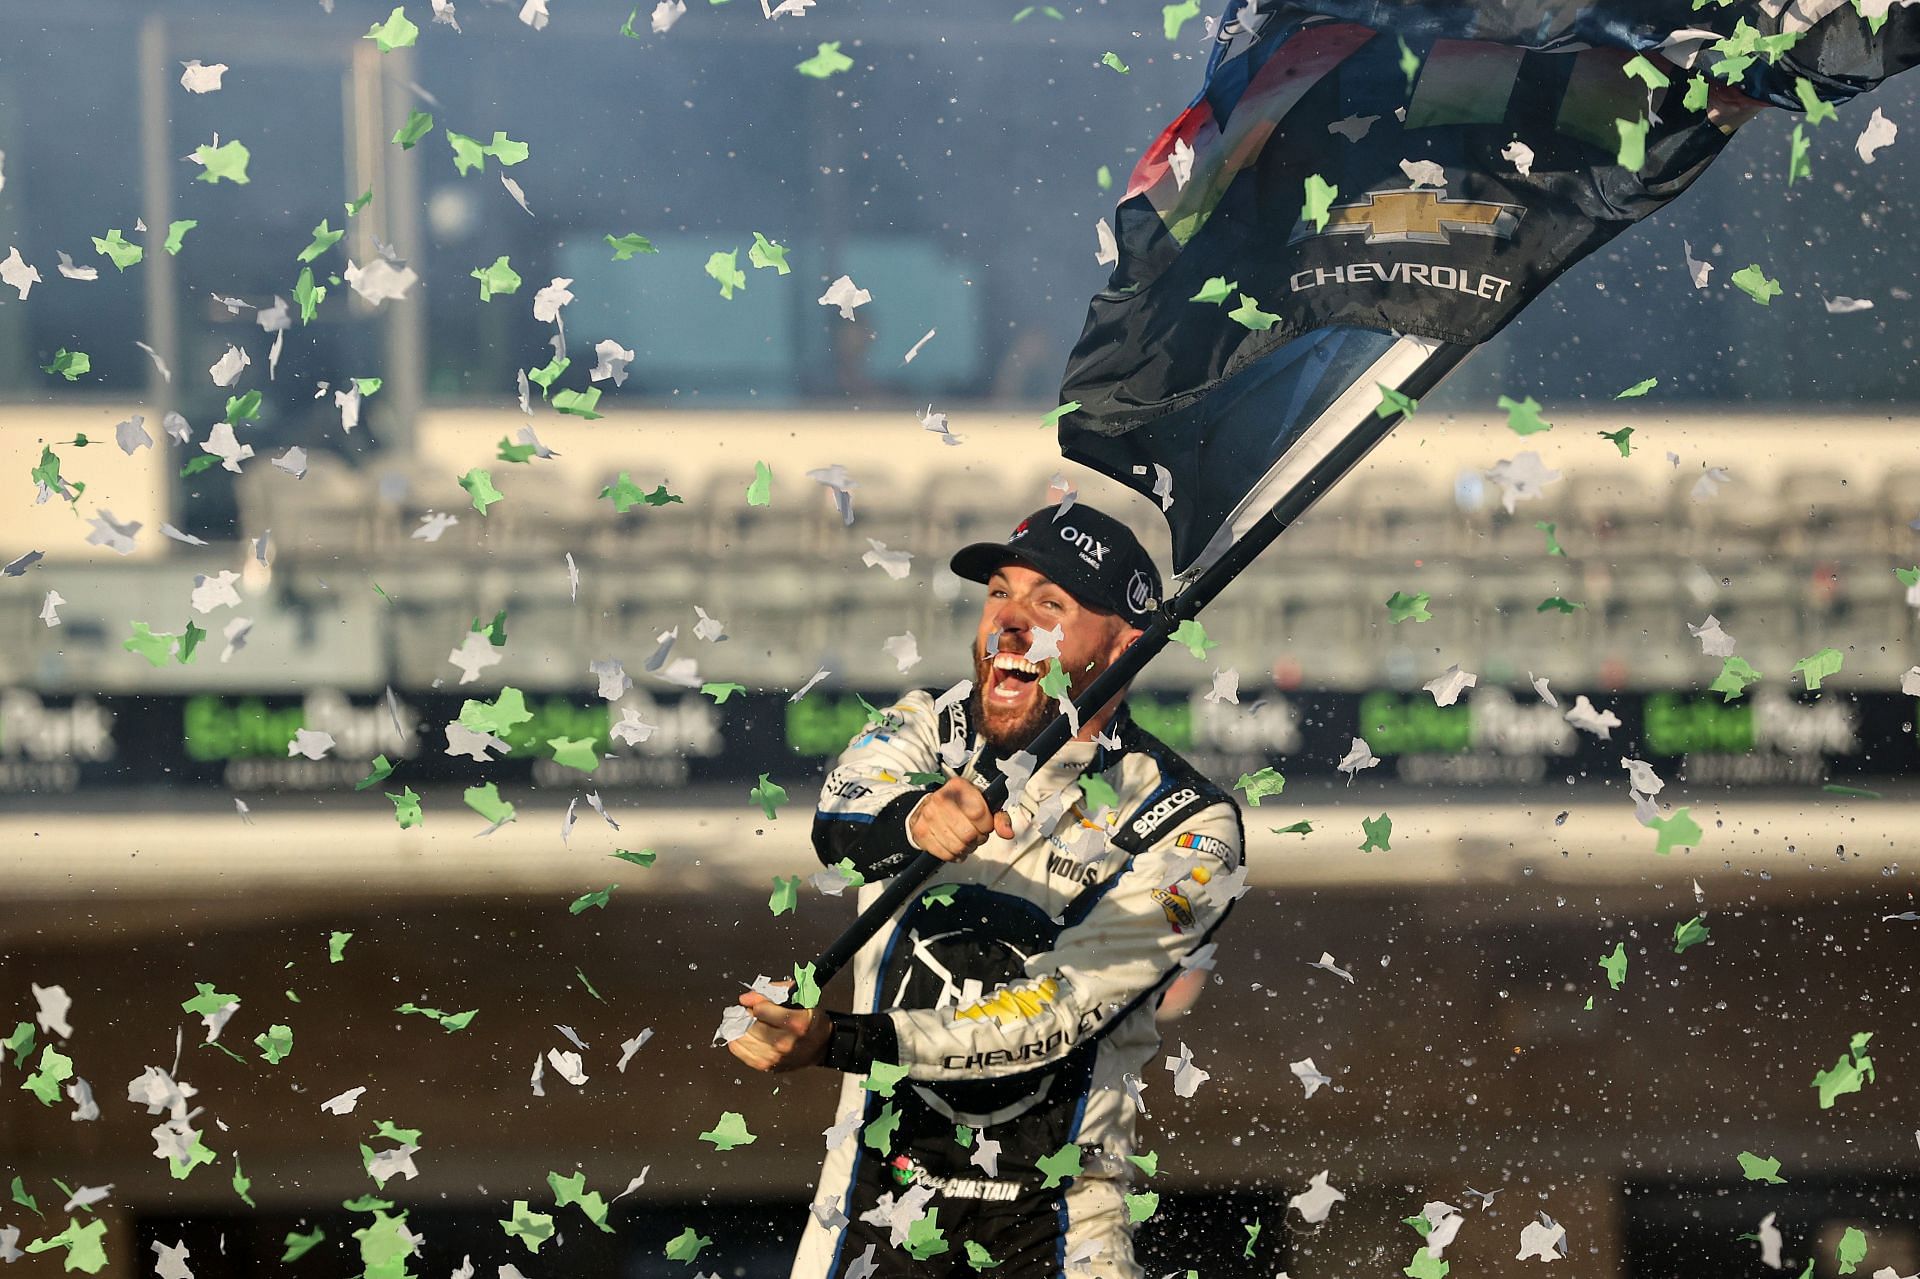 Ross Chastain celebrates in victory lane after winning the NASCAR Cup Series Echopark Automotive Grand Prix.